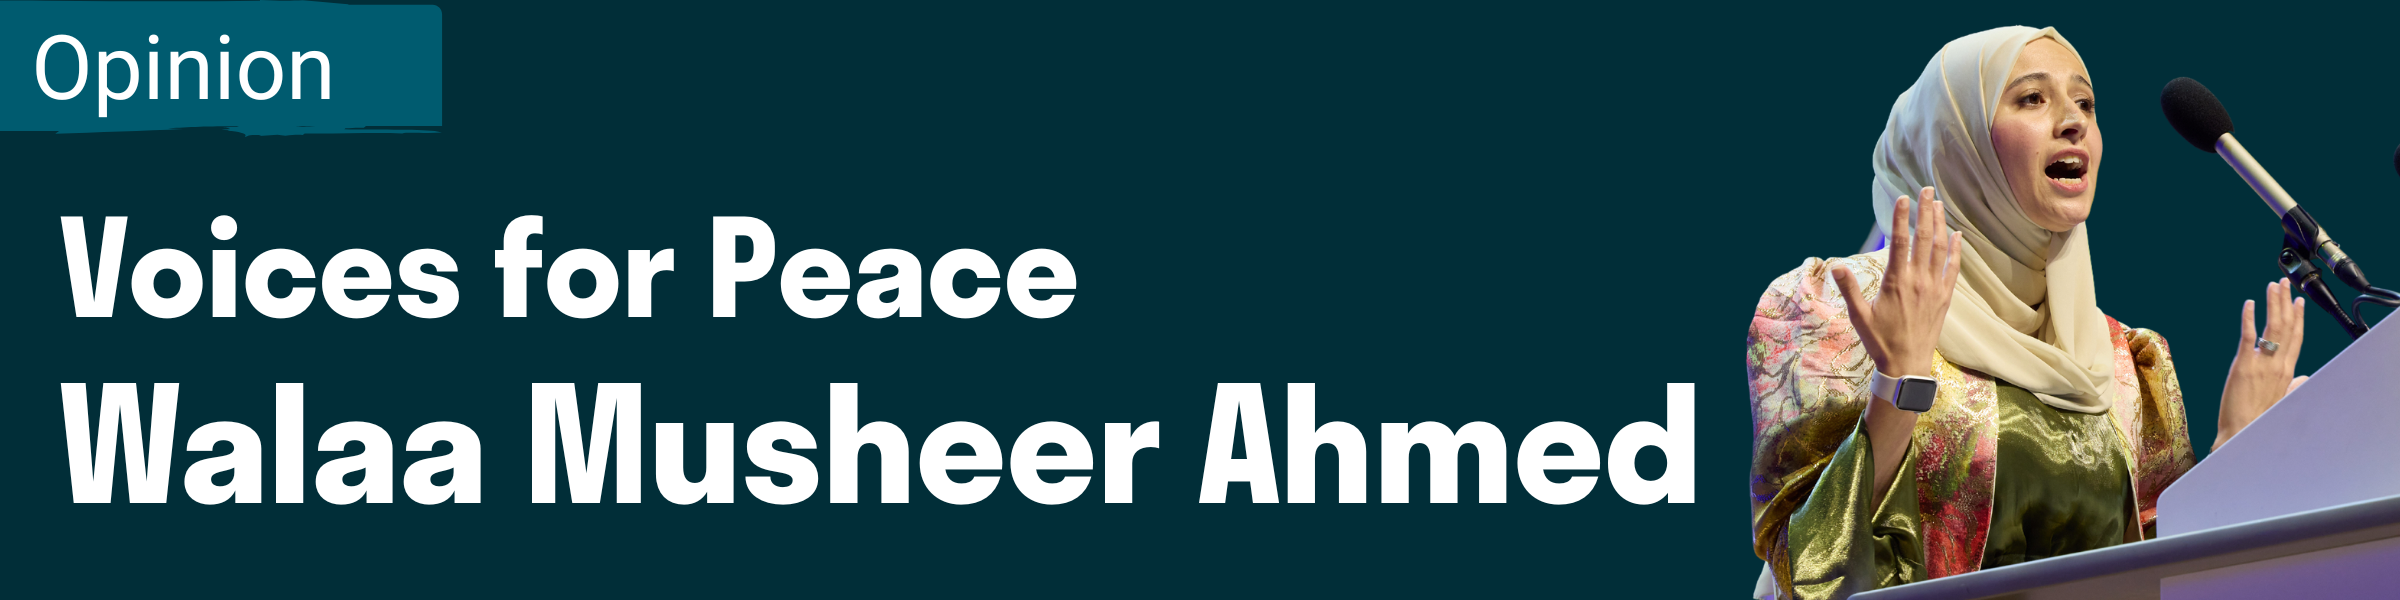 Banner for Walaa Musheer Ahmed Voices for Peace